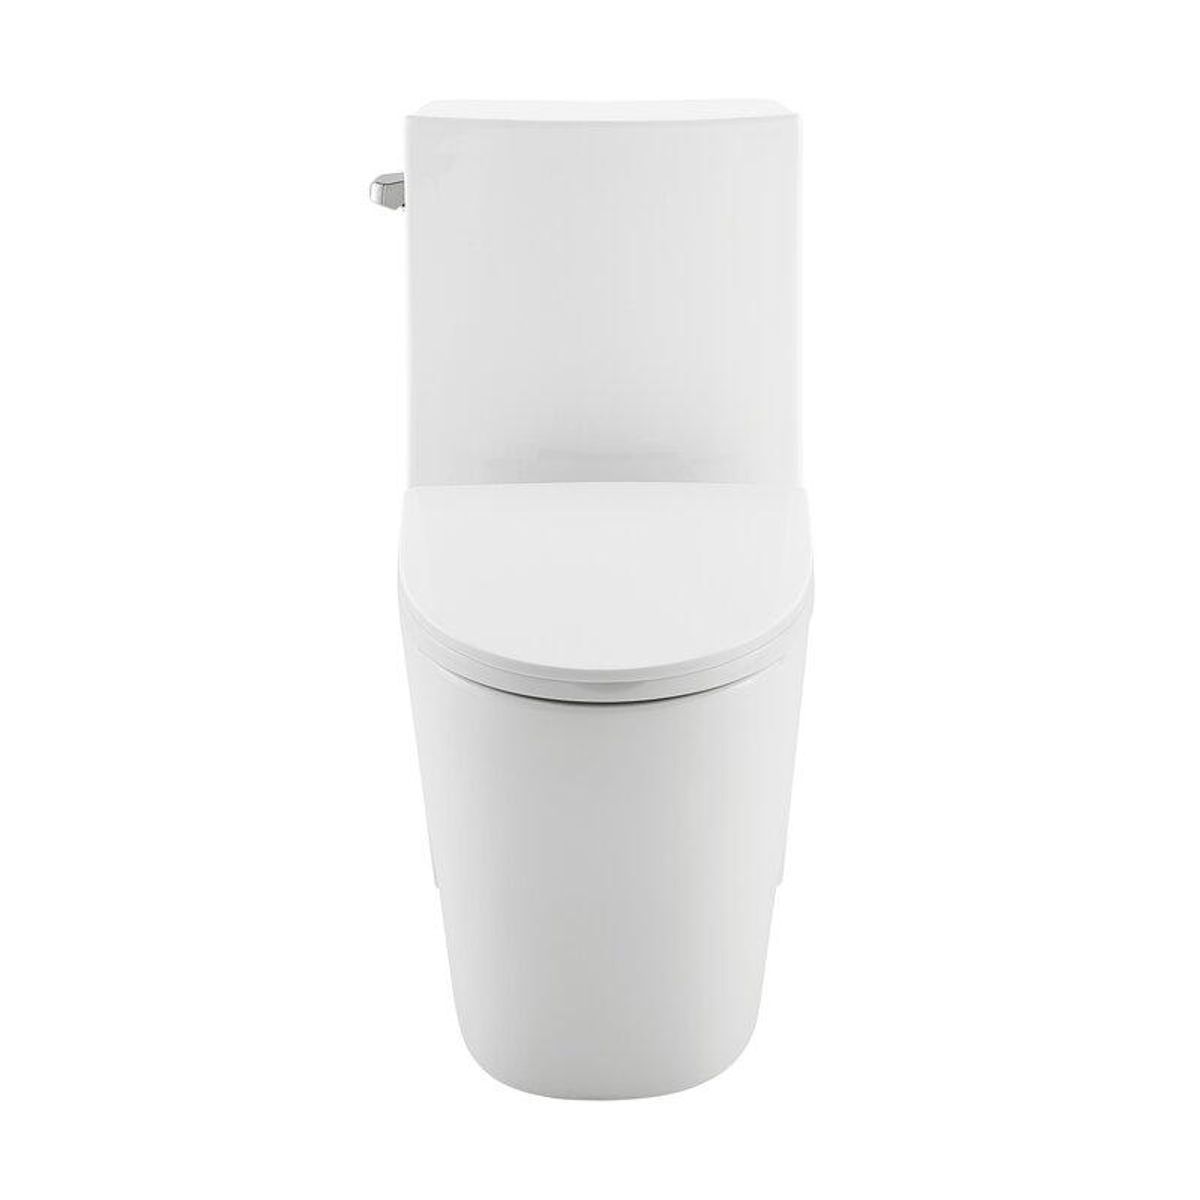 1.28 Water Efficient Elongated One-piece Toilet